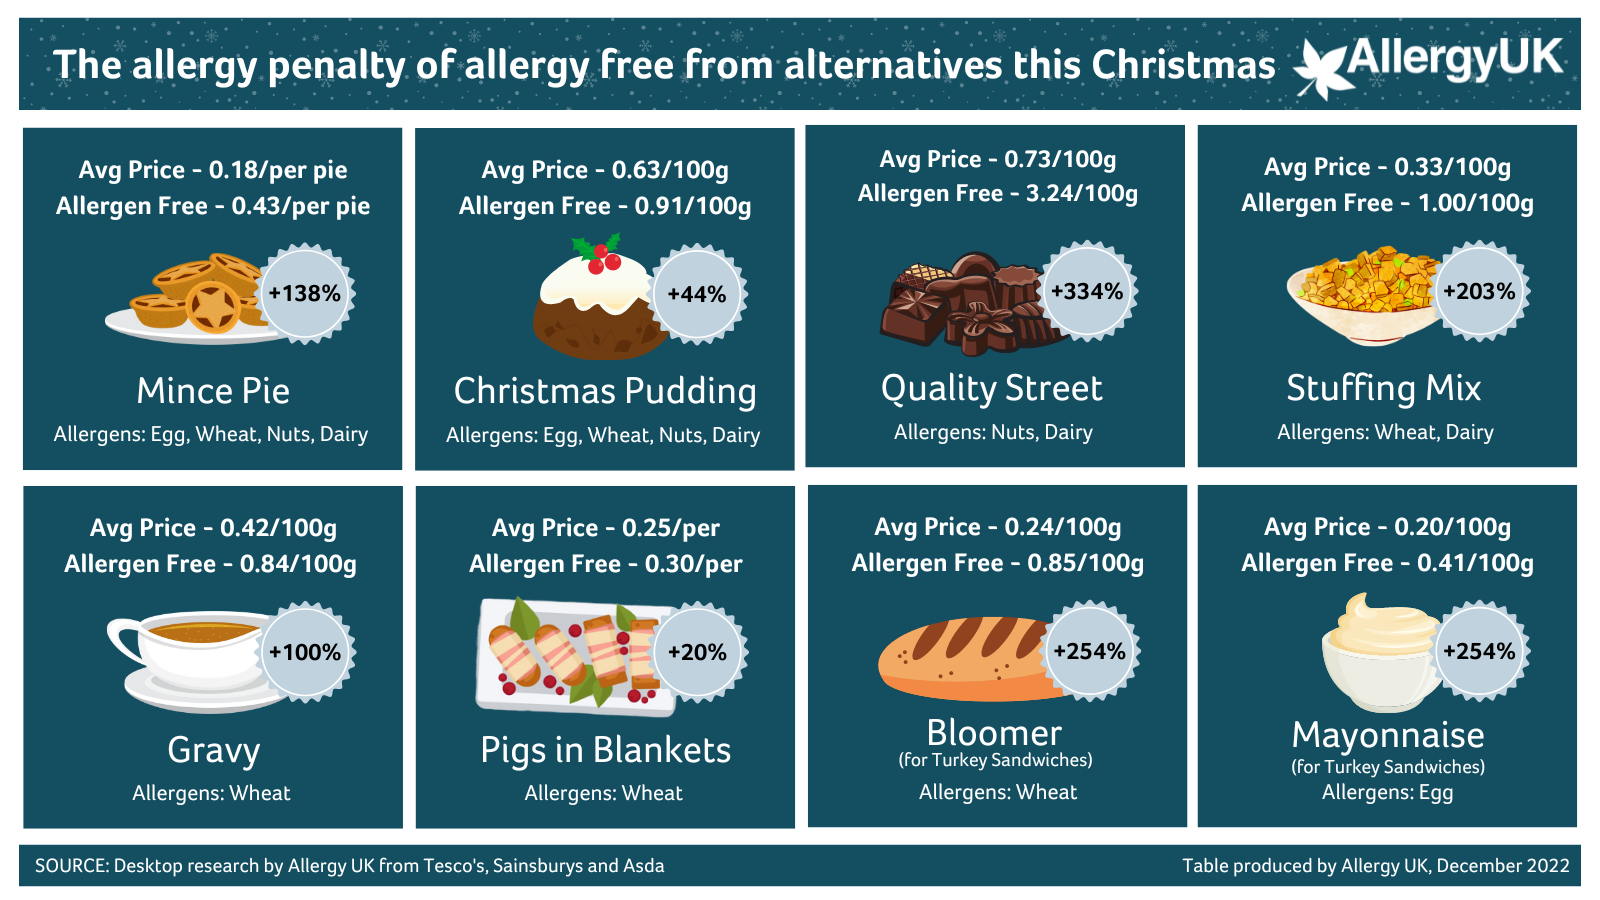 Allergy Penalty of Christmas Items 